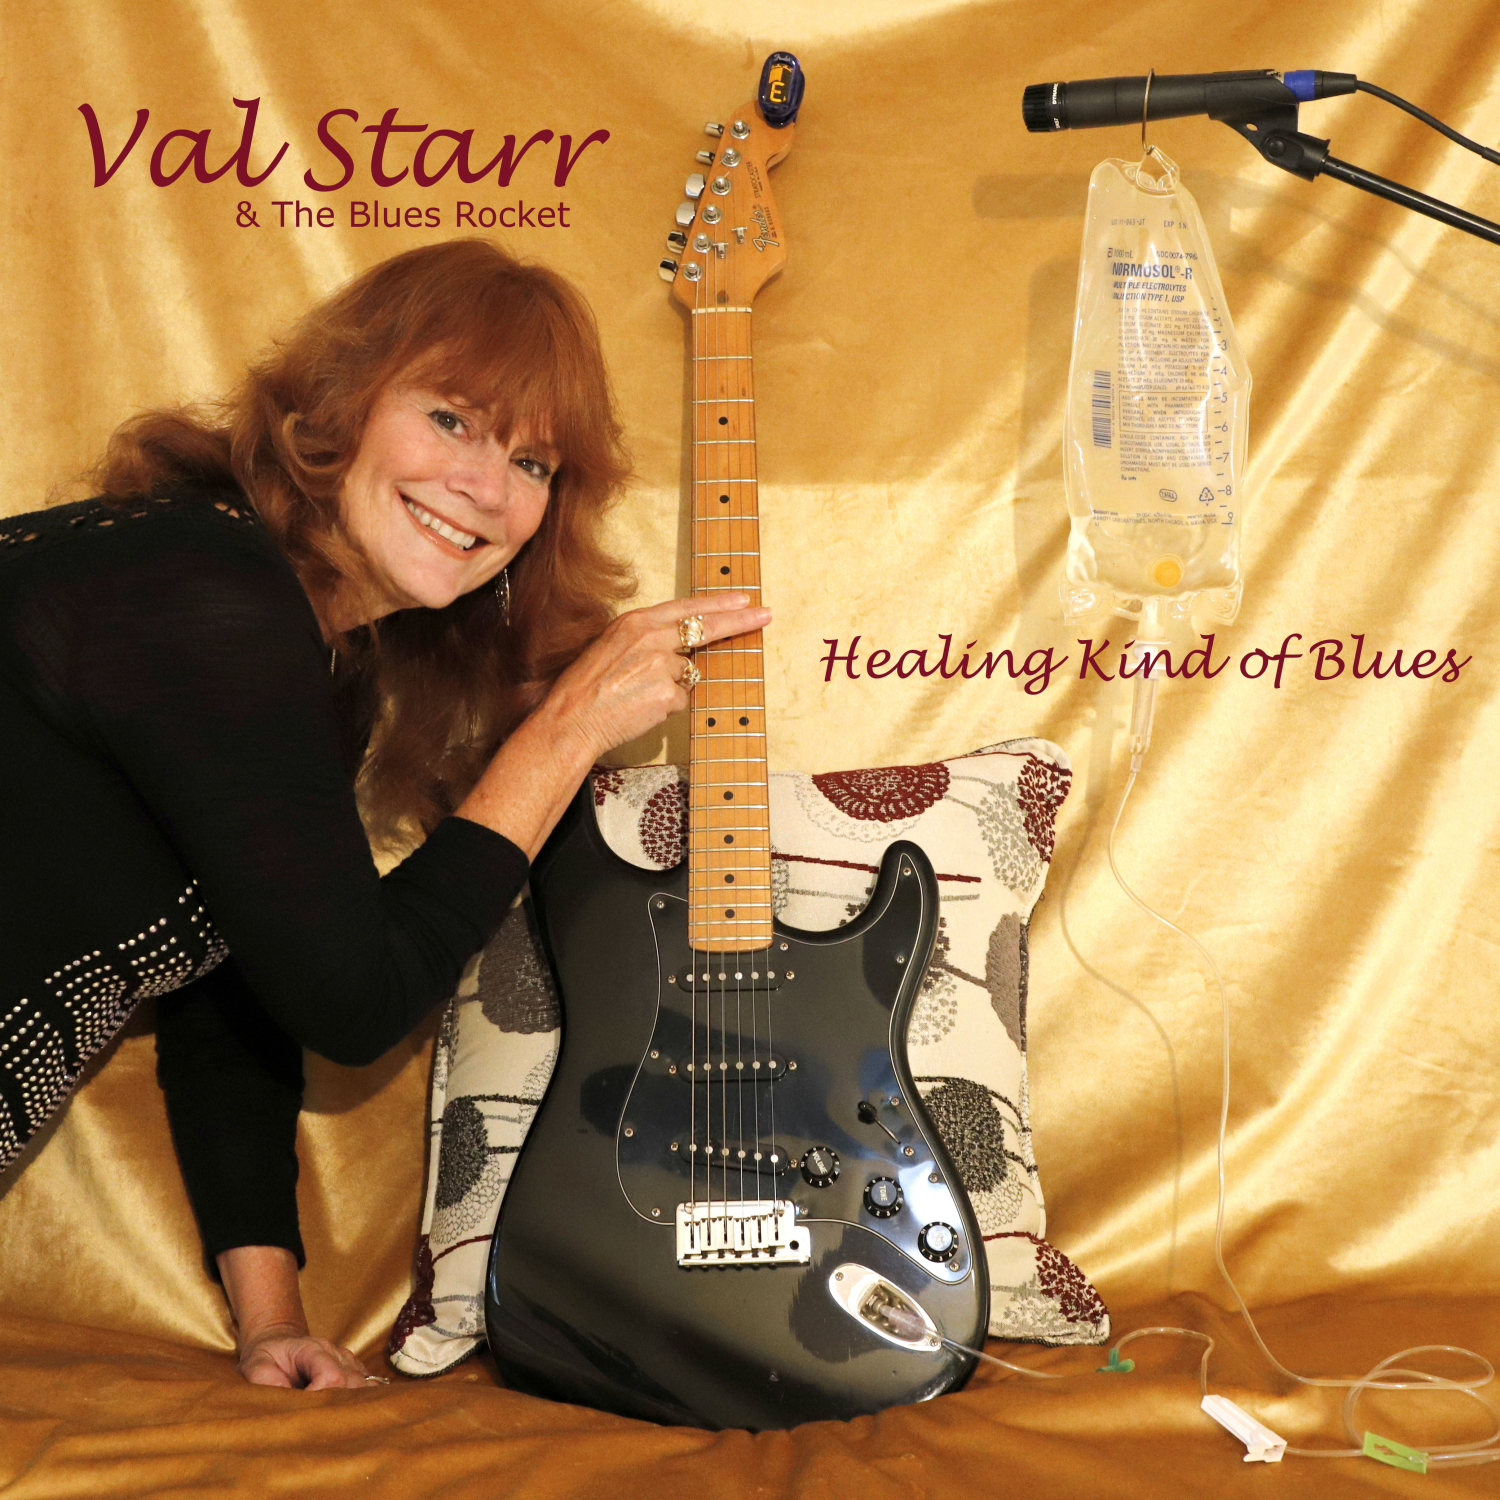 Healing Kind of Blues - Val Starr & the Blues Rocket, Album Cover